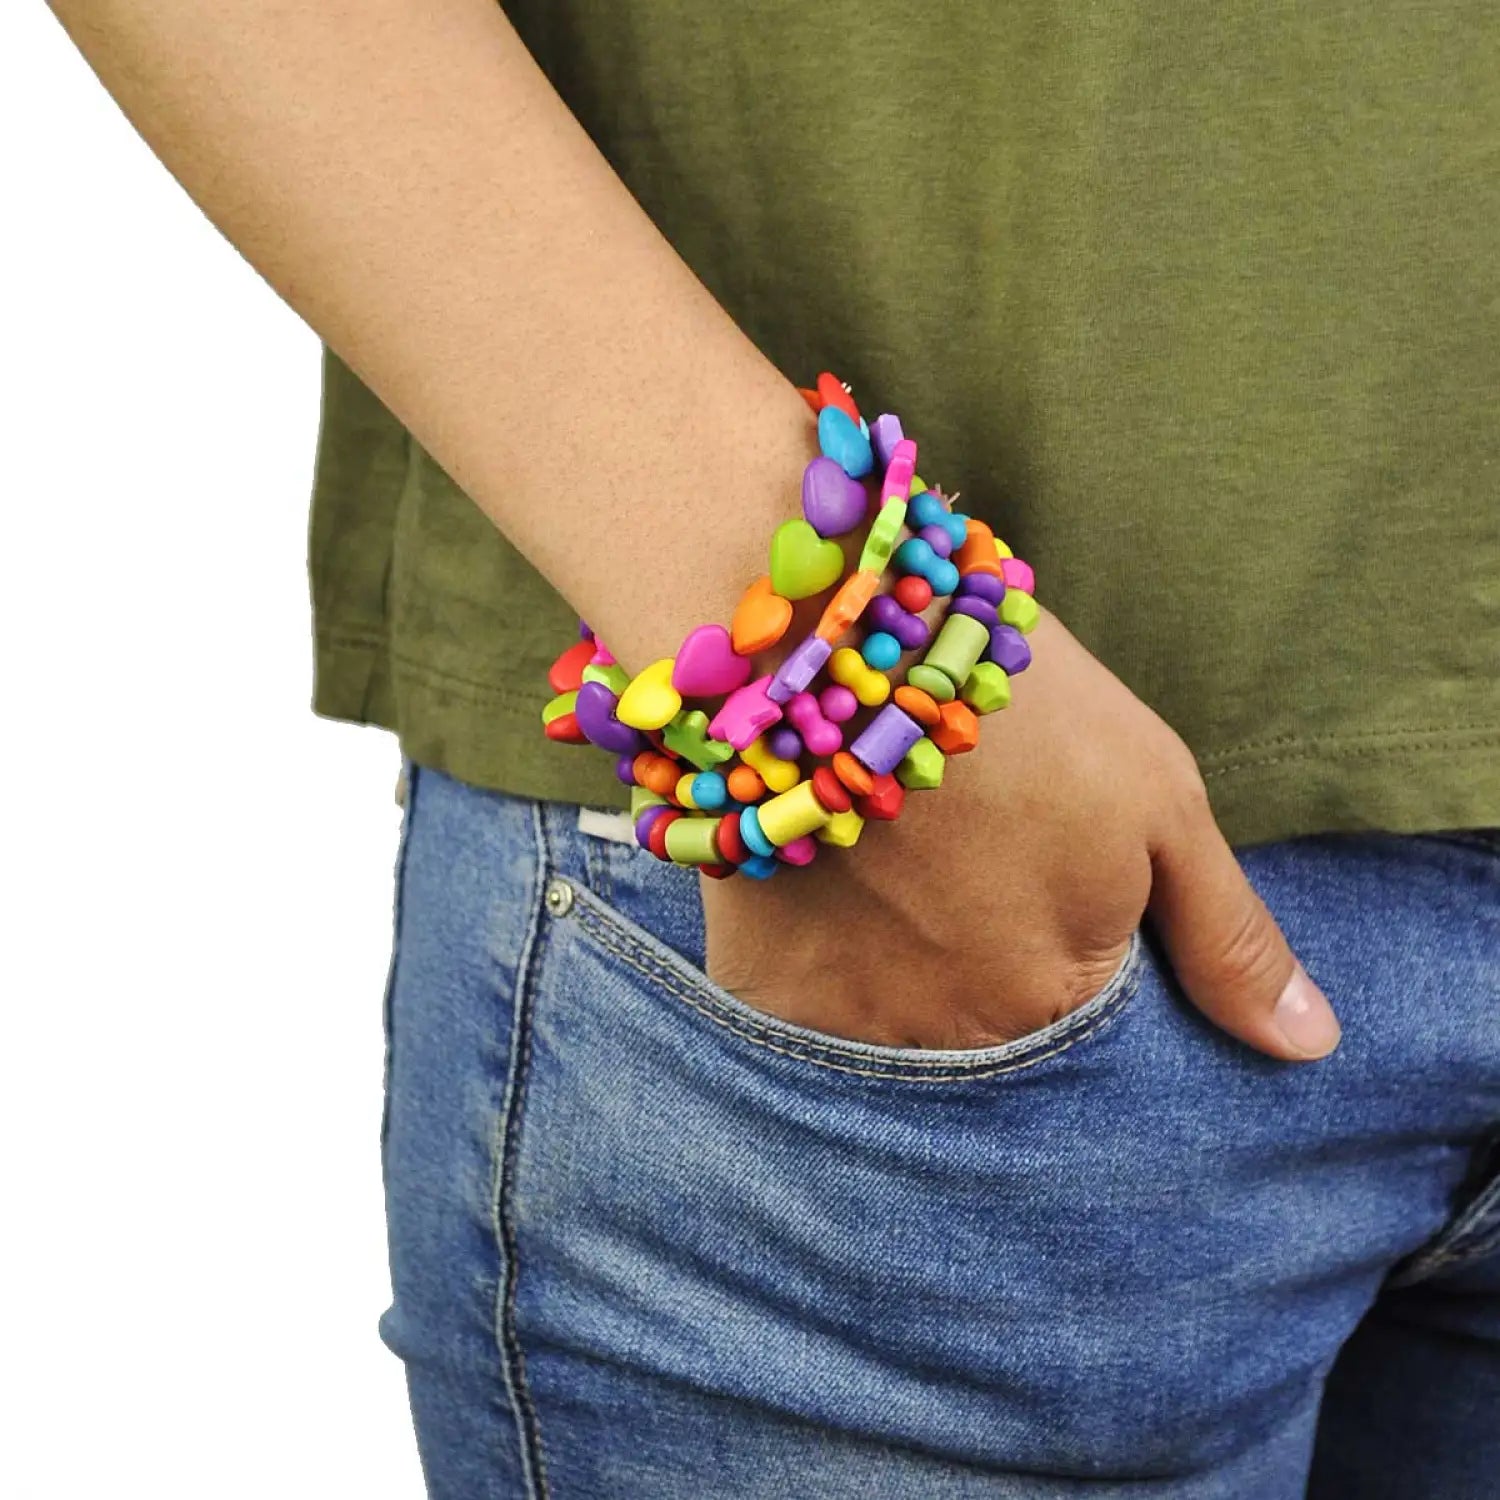 Vibrant multi coloured bracelet with wood-effect beads worn by a person.